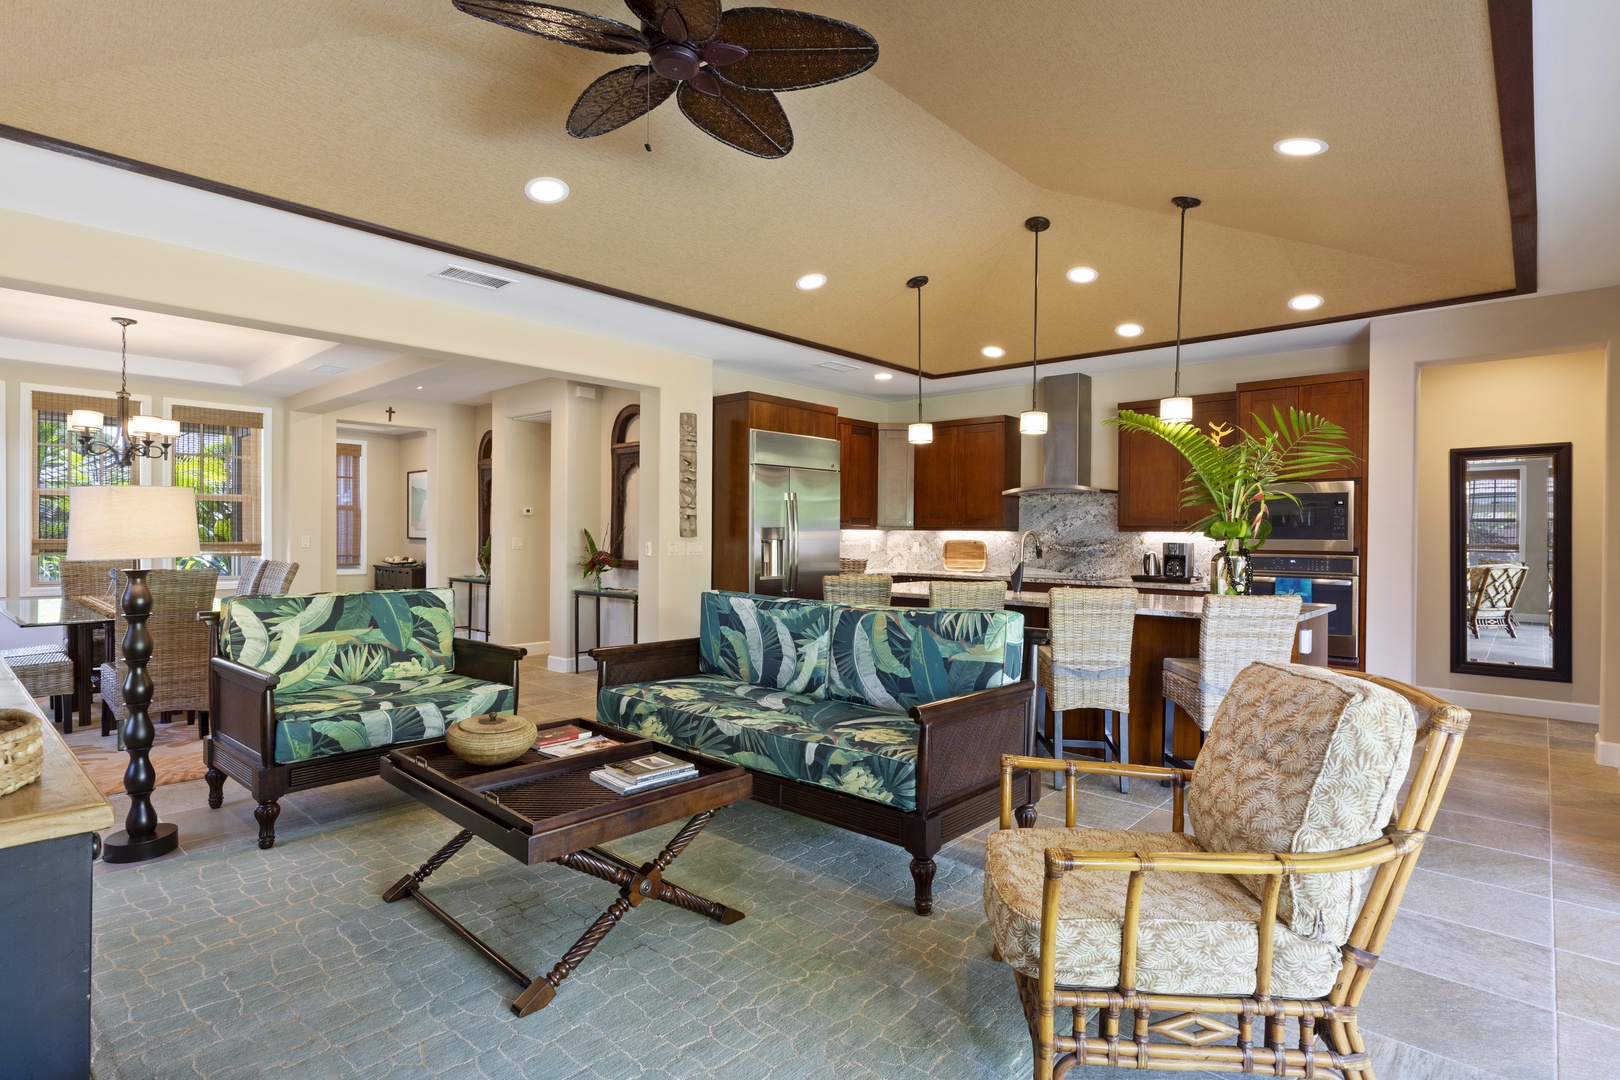 Spacious living space that opens up to the lanai